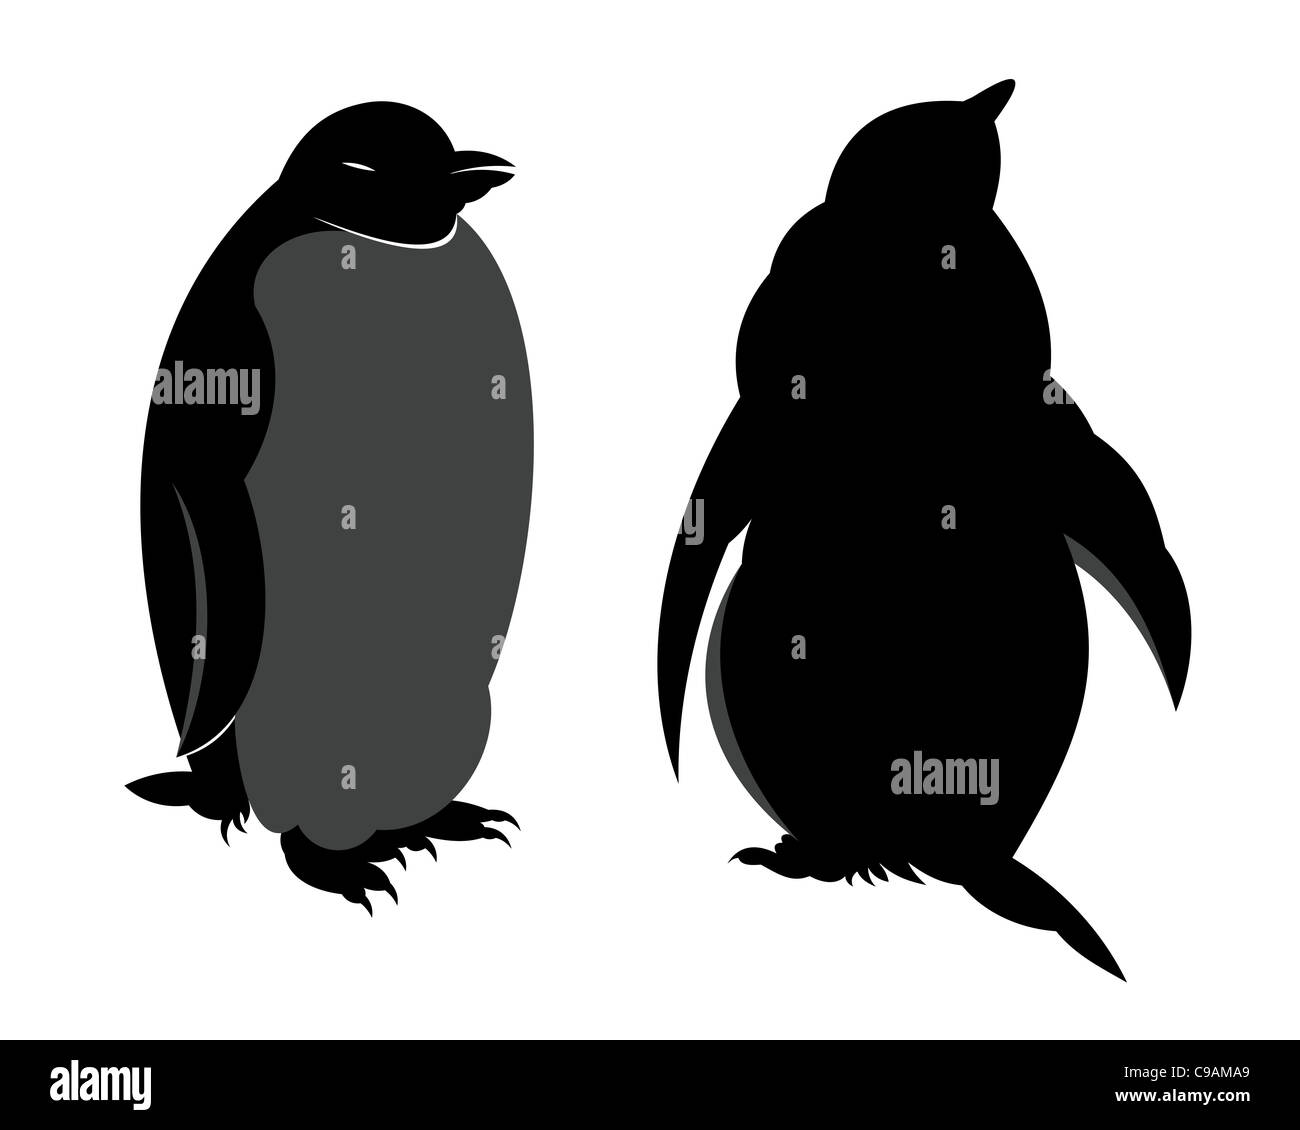 Two penguins. Face and rear views. Illustration. Stock Photo